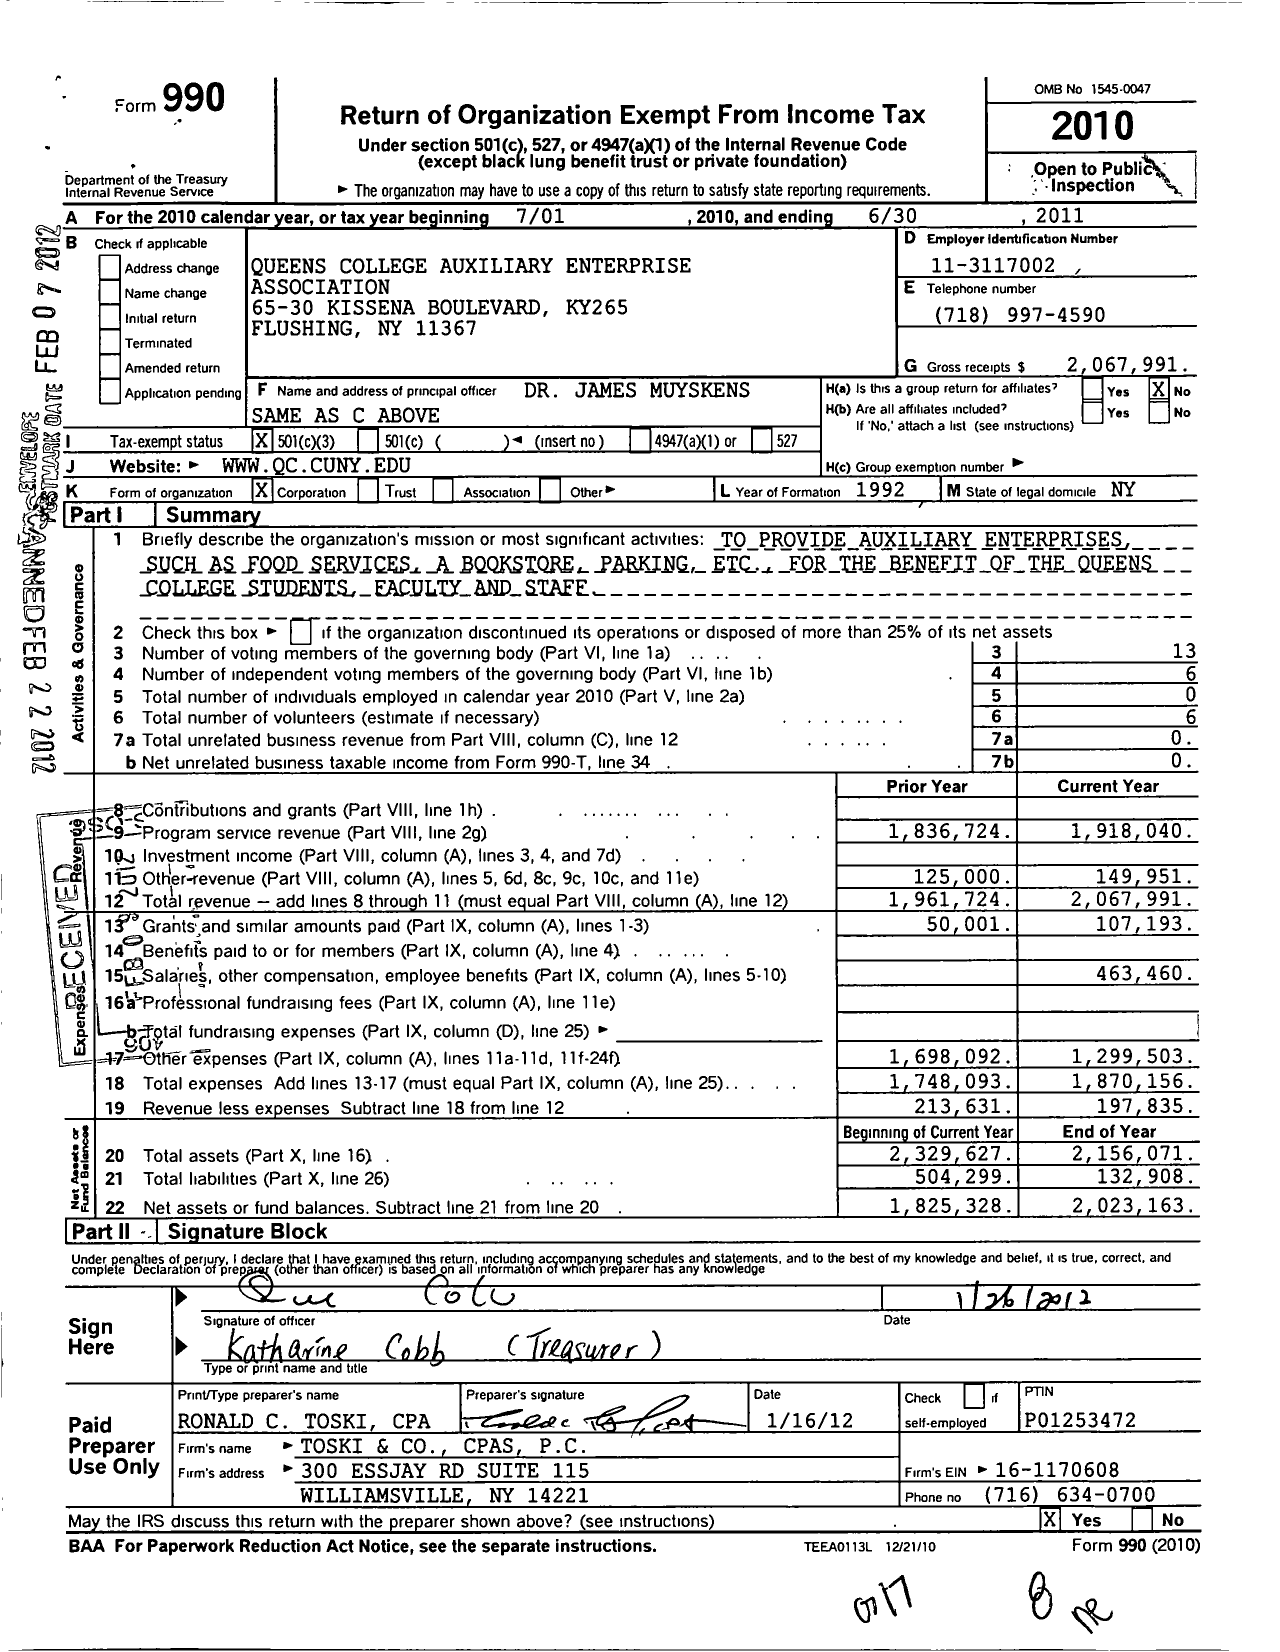 Image of first page of 2010 Form 990 for Queens College Auxiliary Enterprise Association